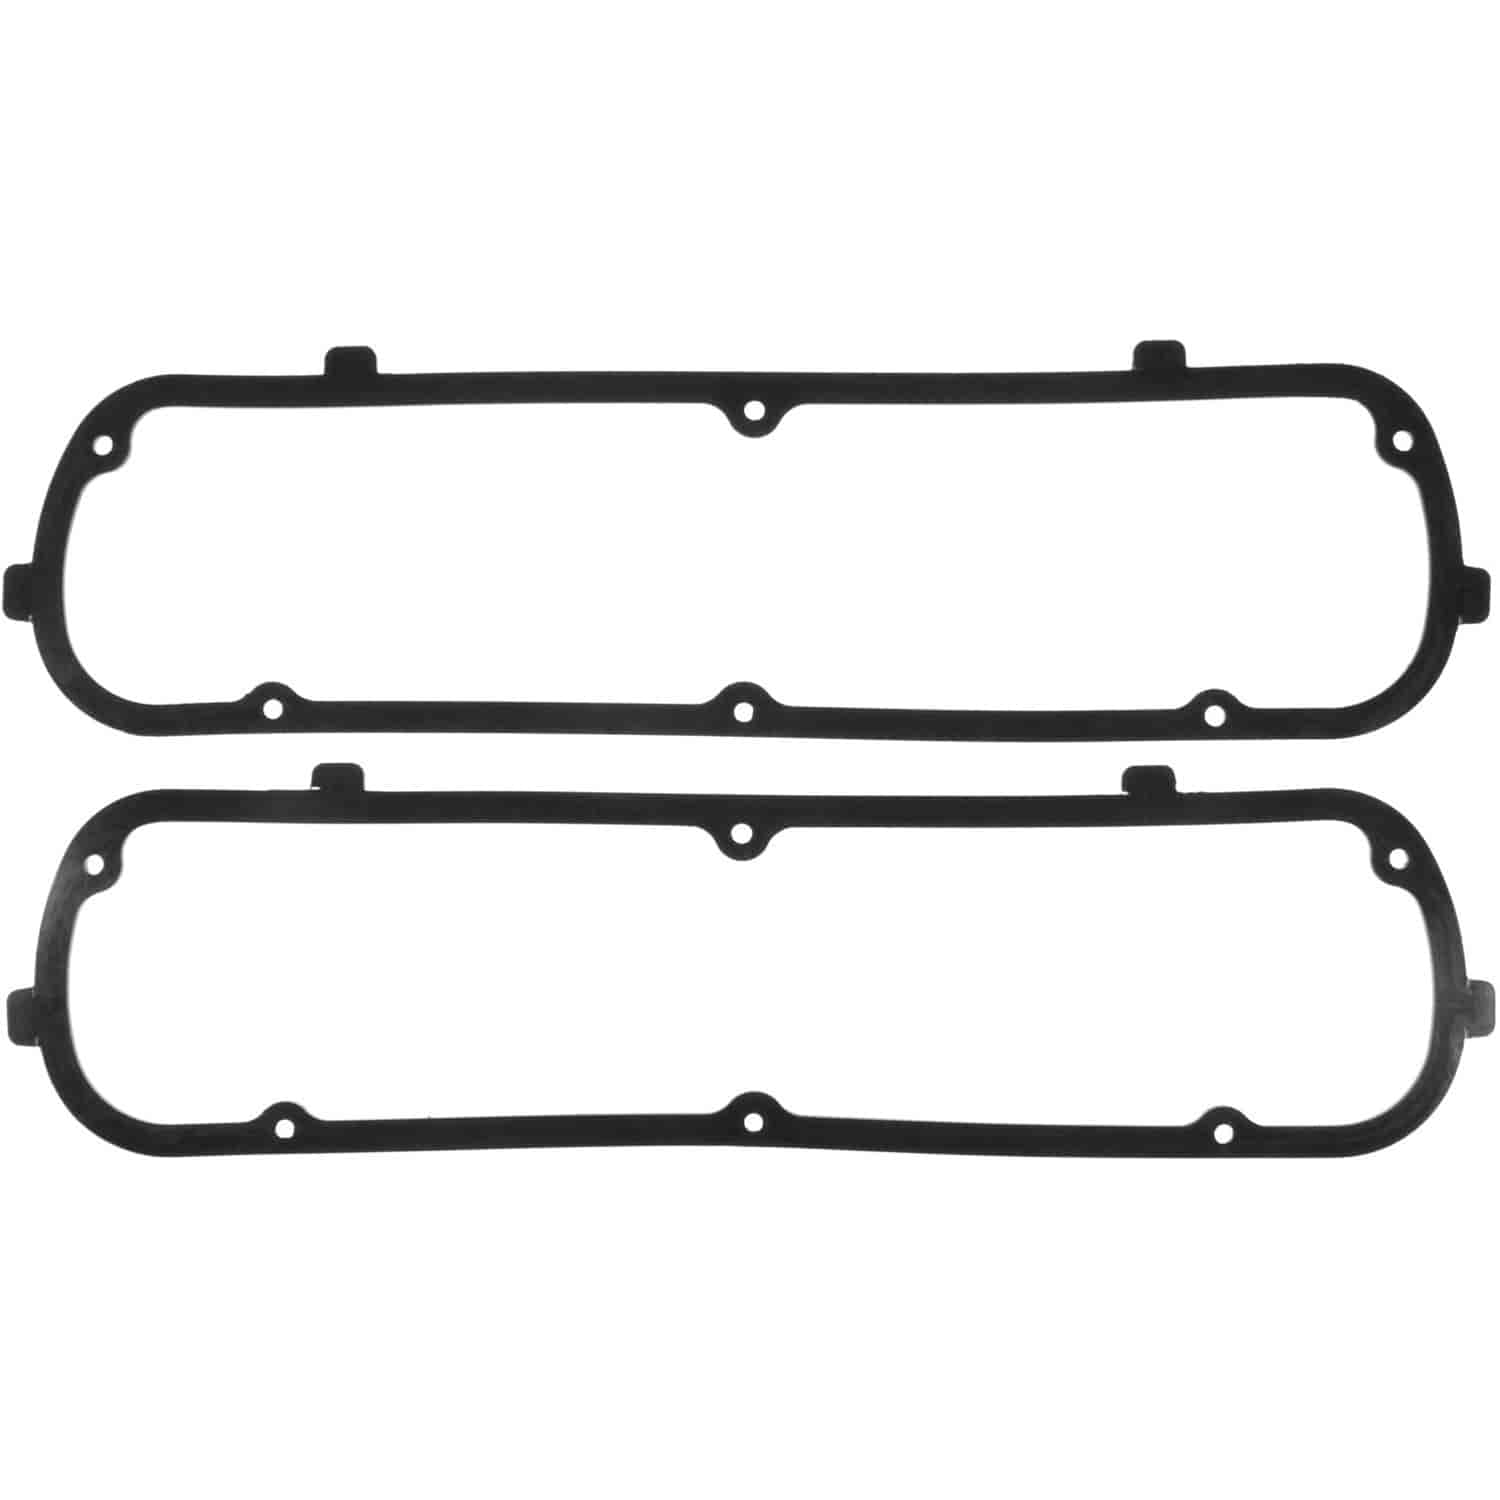 Valve Cover Gasket Set 1962-2001 Small Block Ford 221/255/260/289/302/351W (3.6/4.2/4.3/4.7/5.0/5.8L) in Molded Rubber